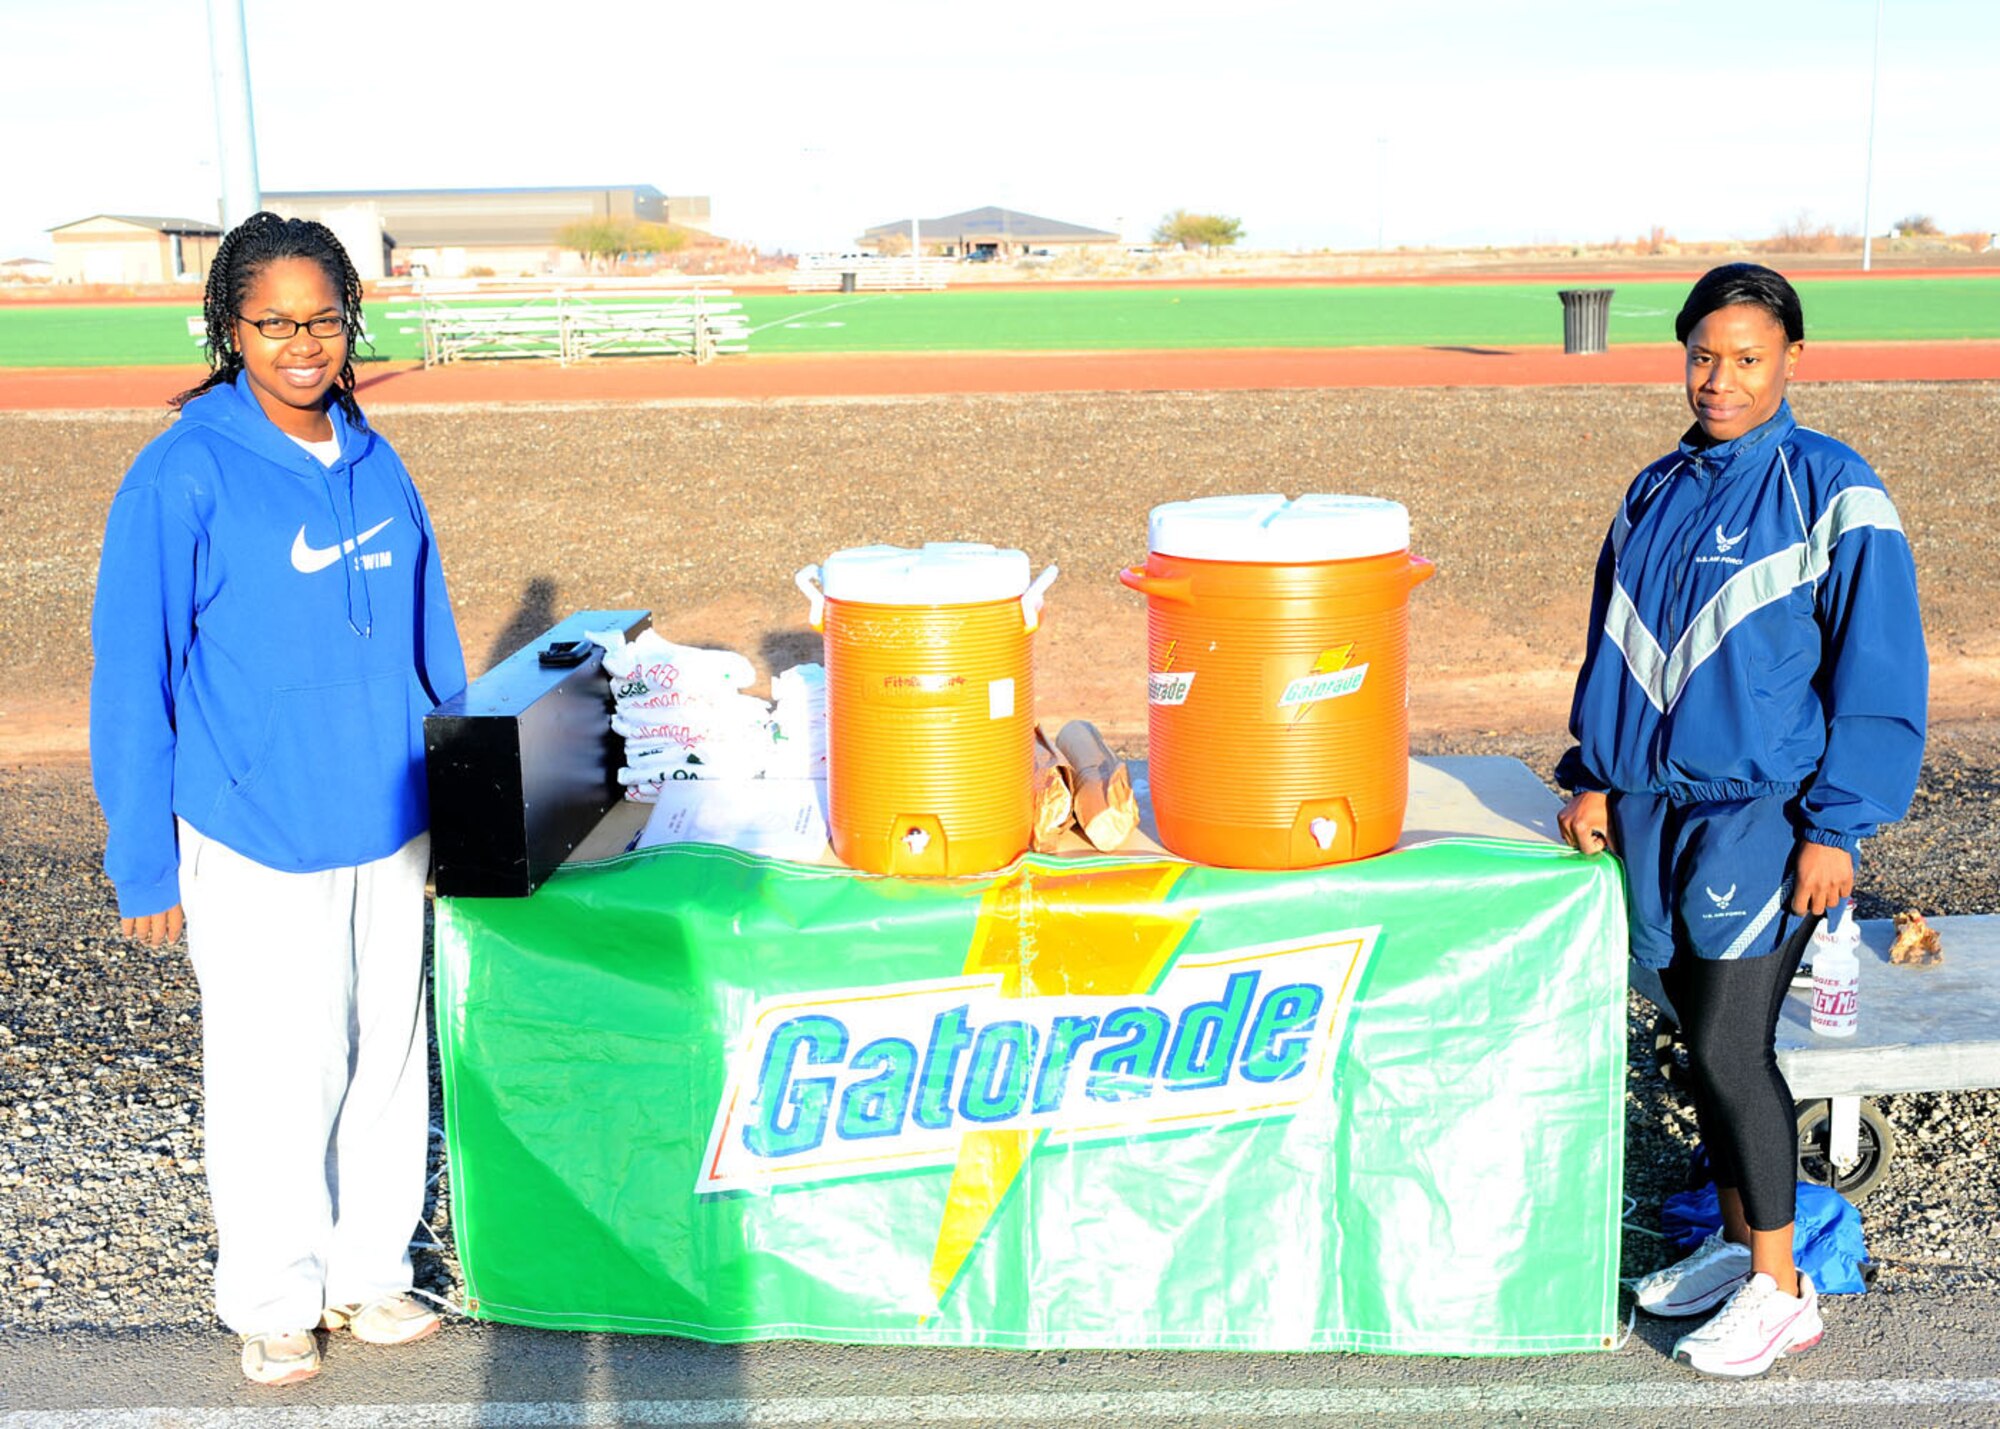 Airman 1st Class Connecticut Wilson and Airman 1st Class Charisse Balthazar from the 49th Force Support Squadron were the officials at the Holloman Air Force Base, N.M., Frosty 5K run at the Fitness and Sports Center track Dec. 19. The Fitness and Sports Center sponsors all the  monthly runs. (U.S Air Force photo/ Airman 1st Class DeAndre Curtiss)